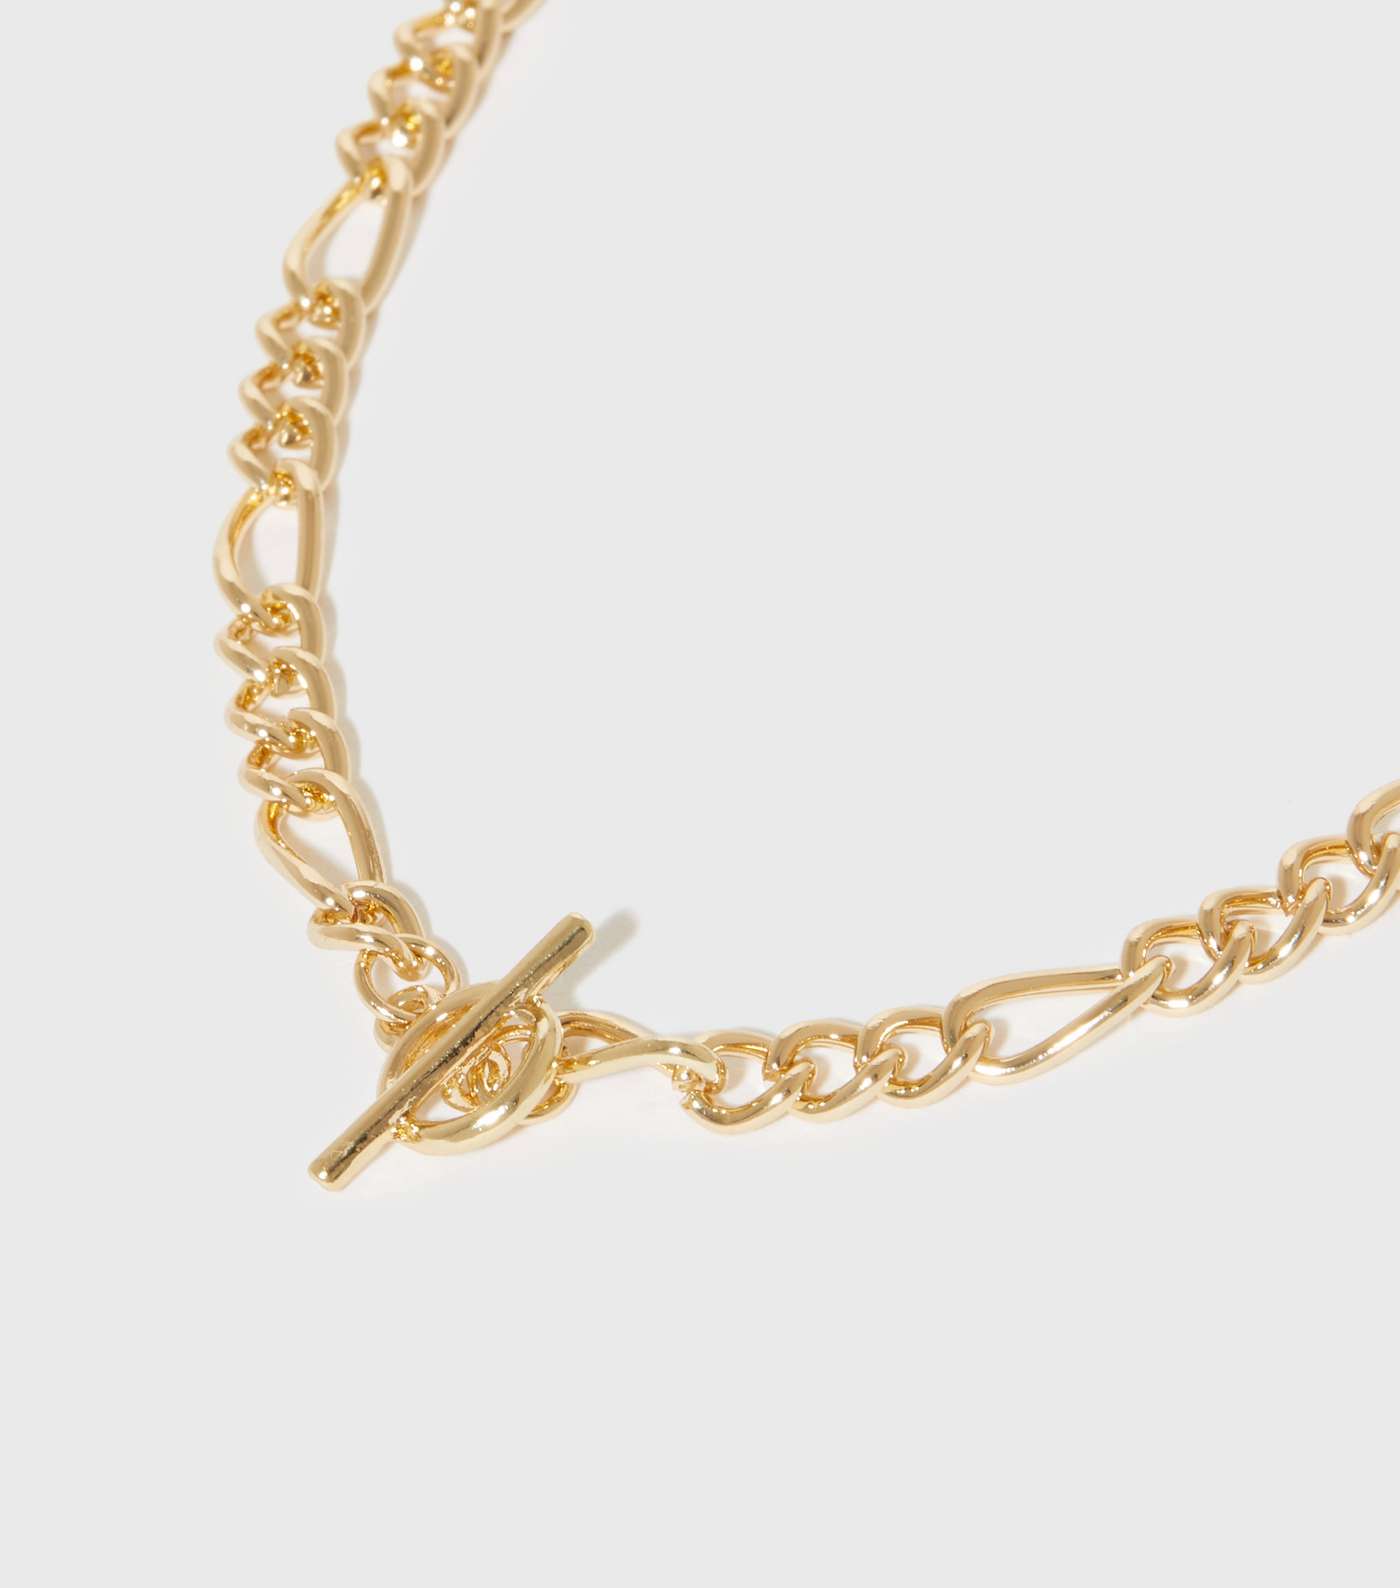 Gold T Bar Chain Necklace Image 2